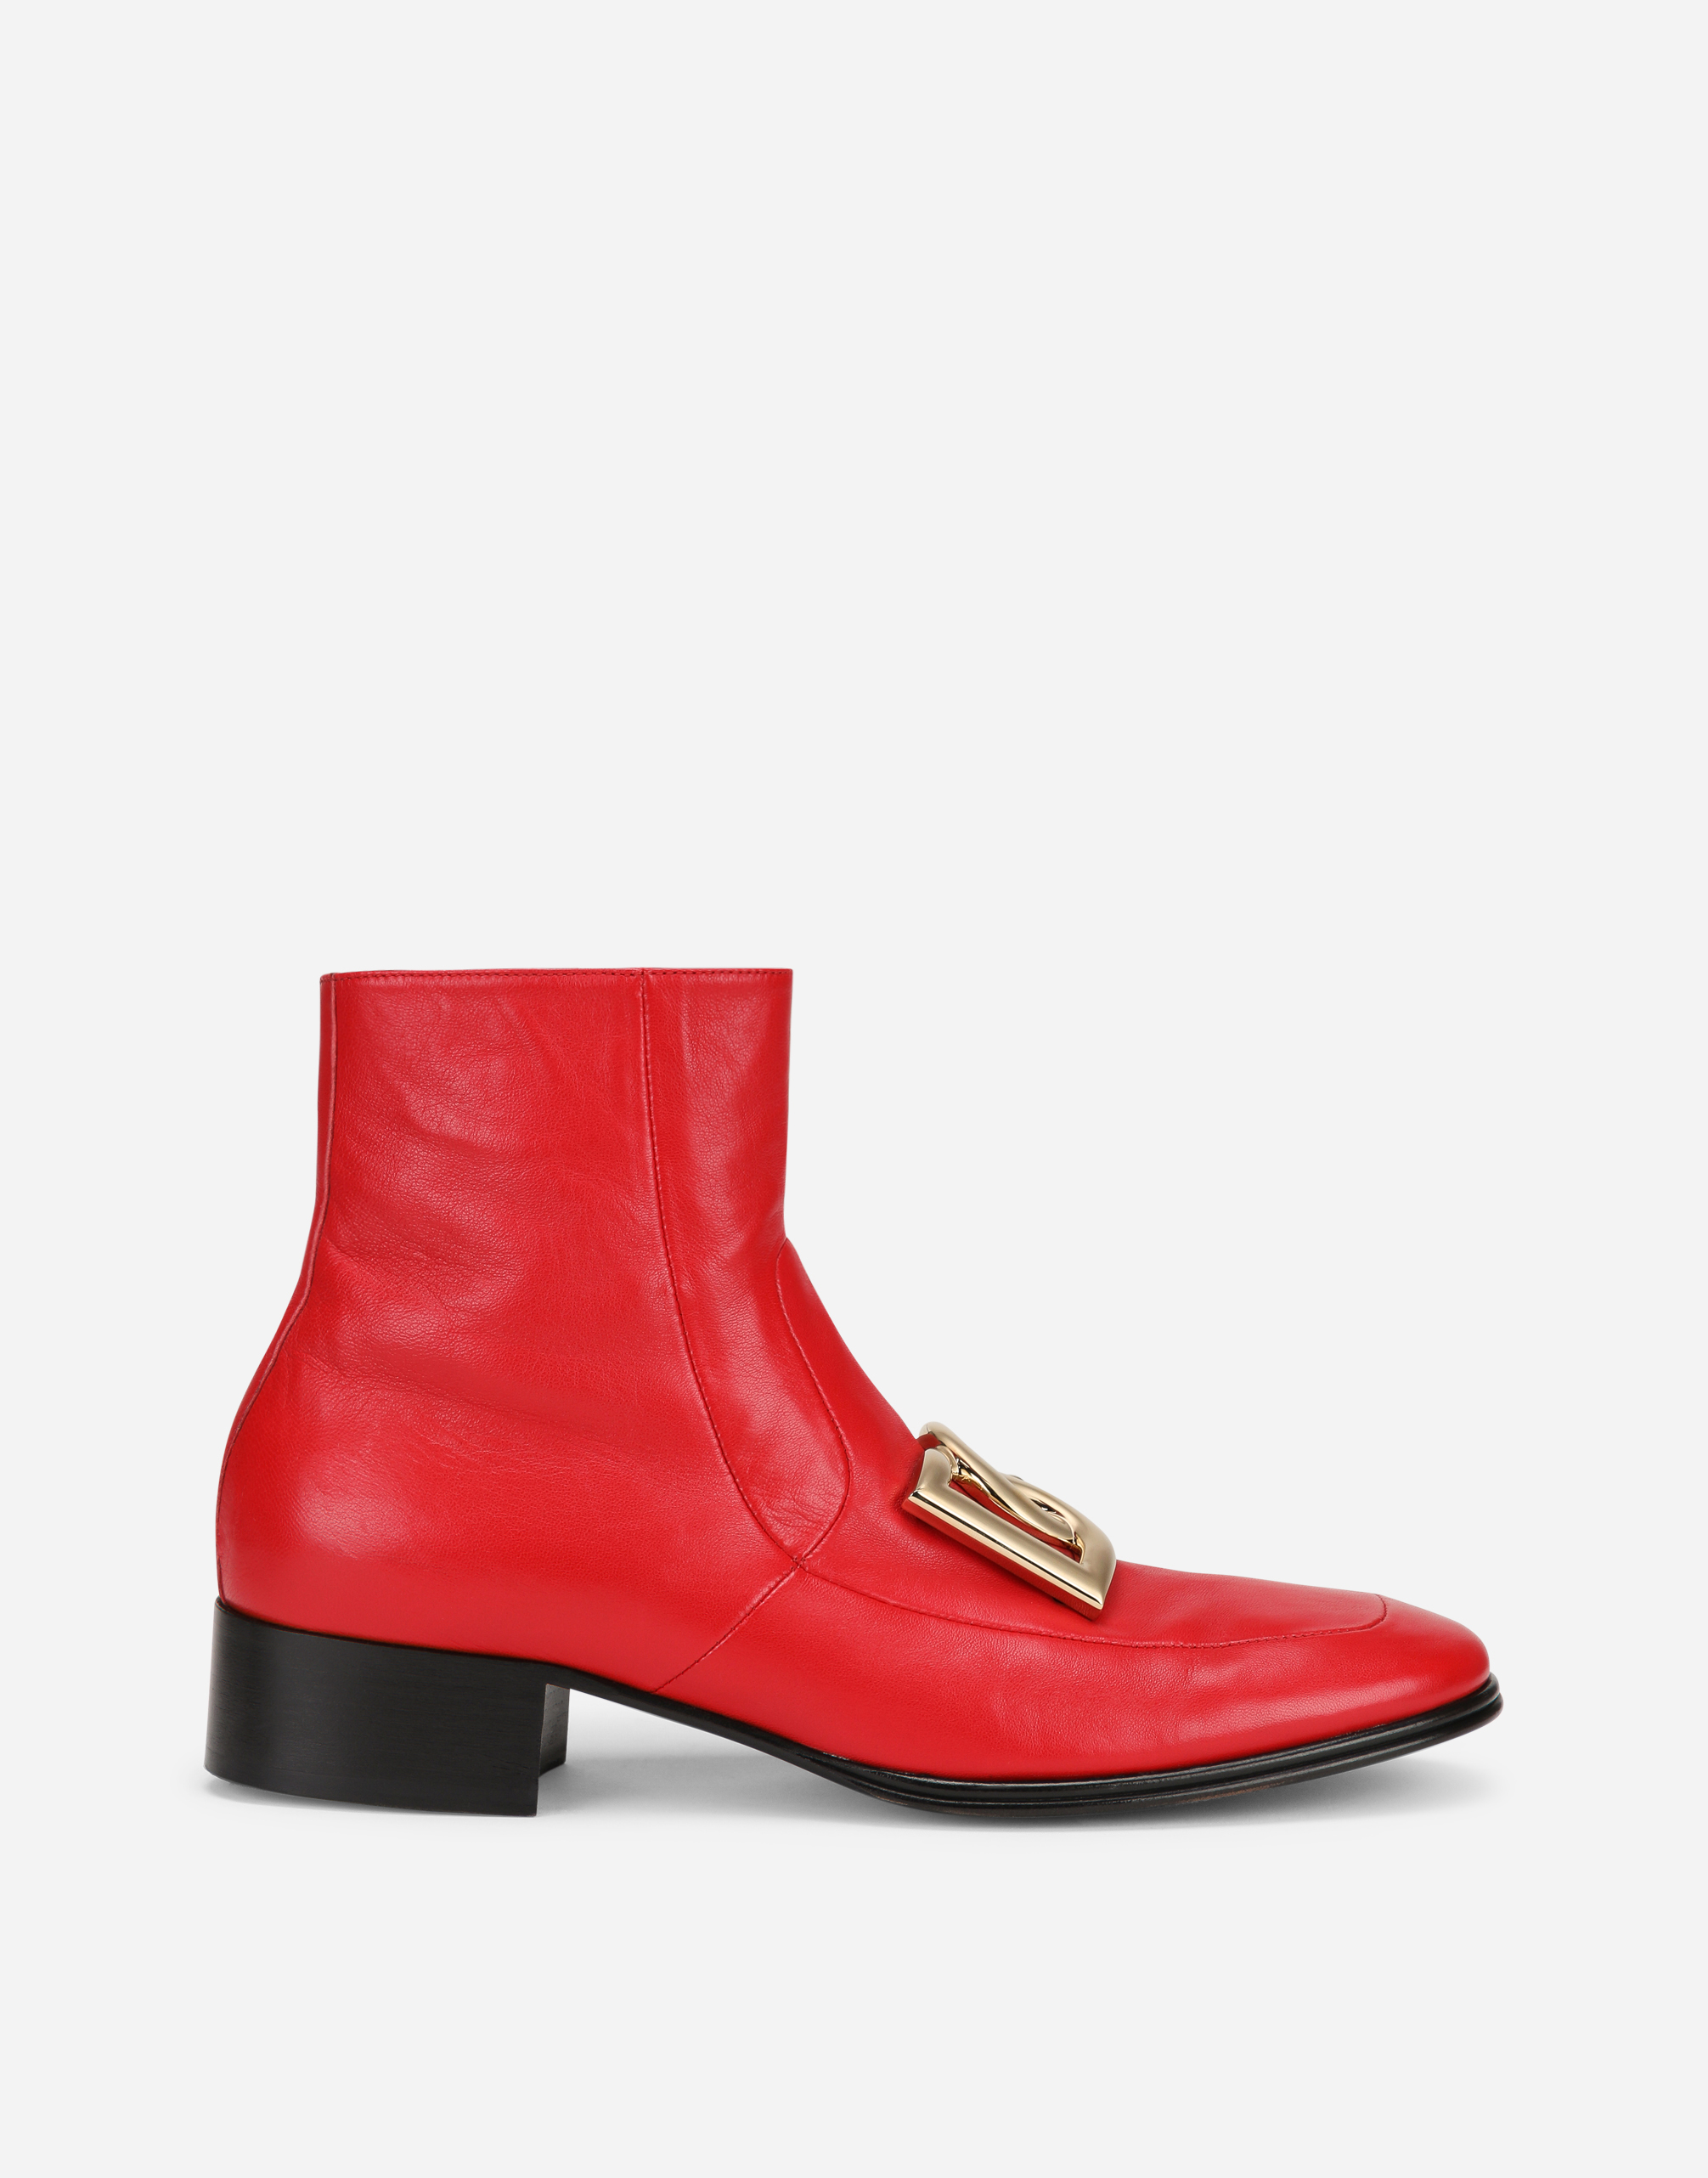 DOLCE & GABBANA NAPPA LEATHER ANKLE BOOTS WITH DG LOGO